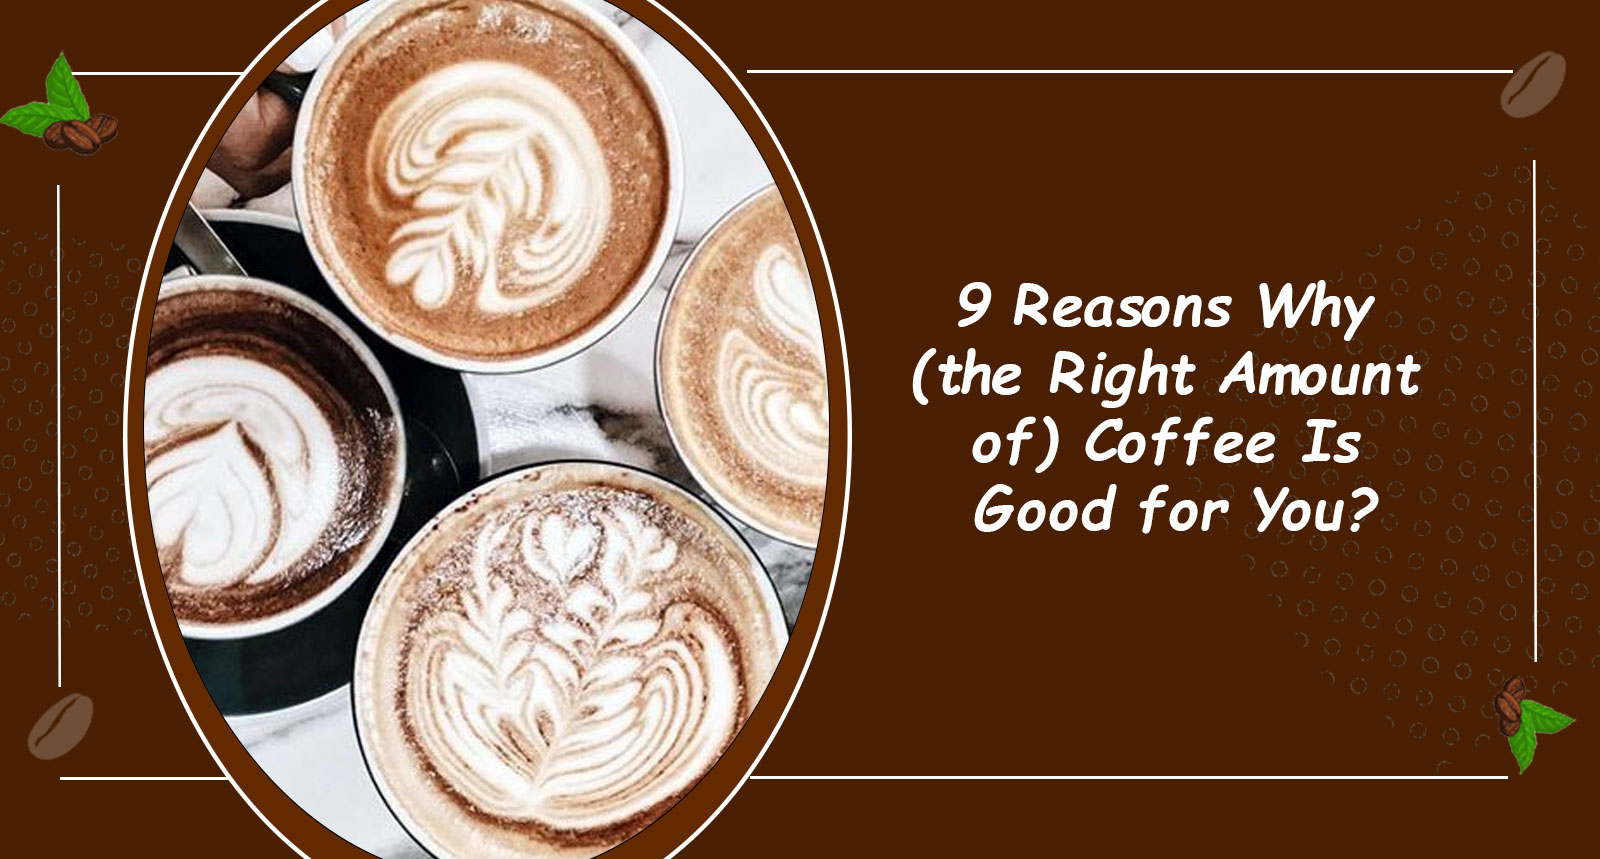 9 Reasons Why the Right Amount of Coffee Is Good for You